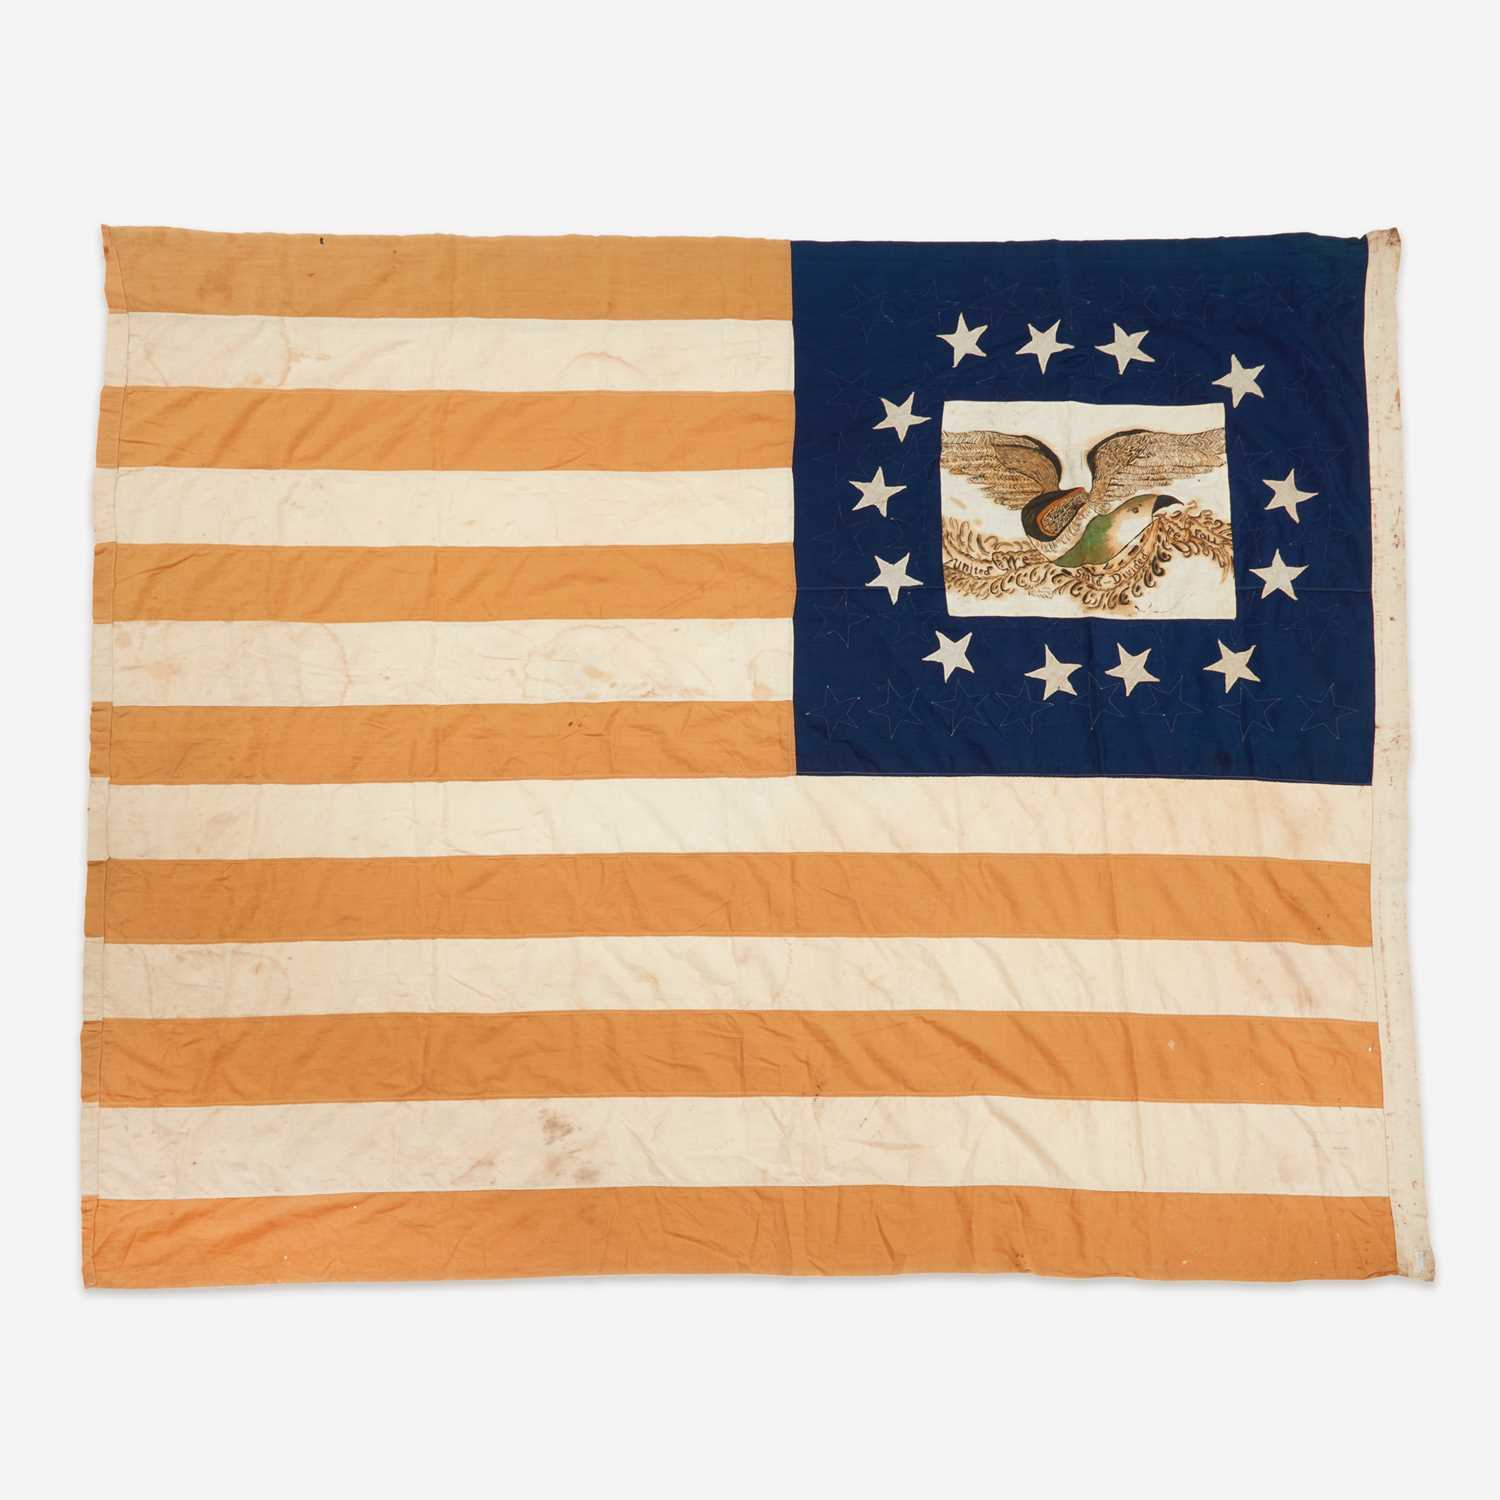 Lot 35 - A 44/13 Star American National Flag commemorating Wyoming statehood